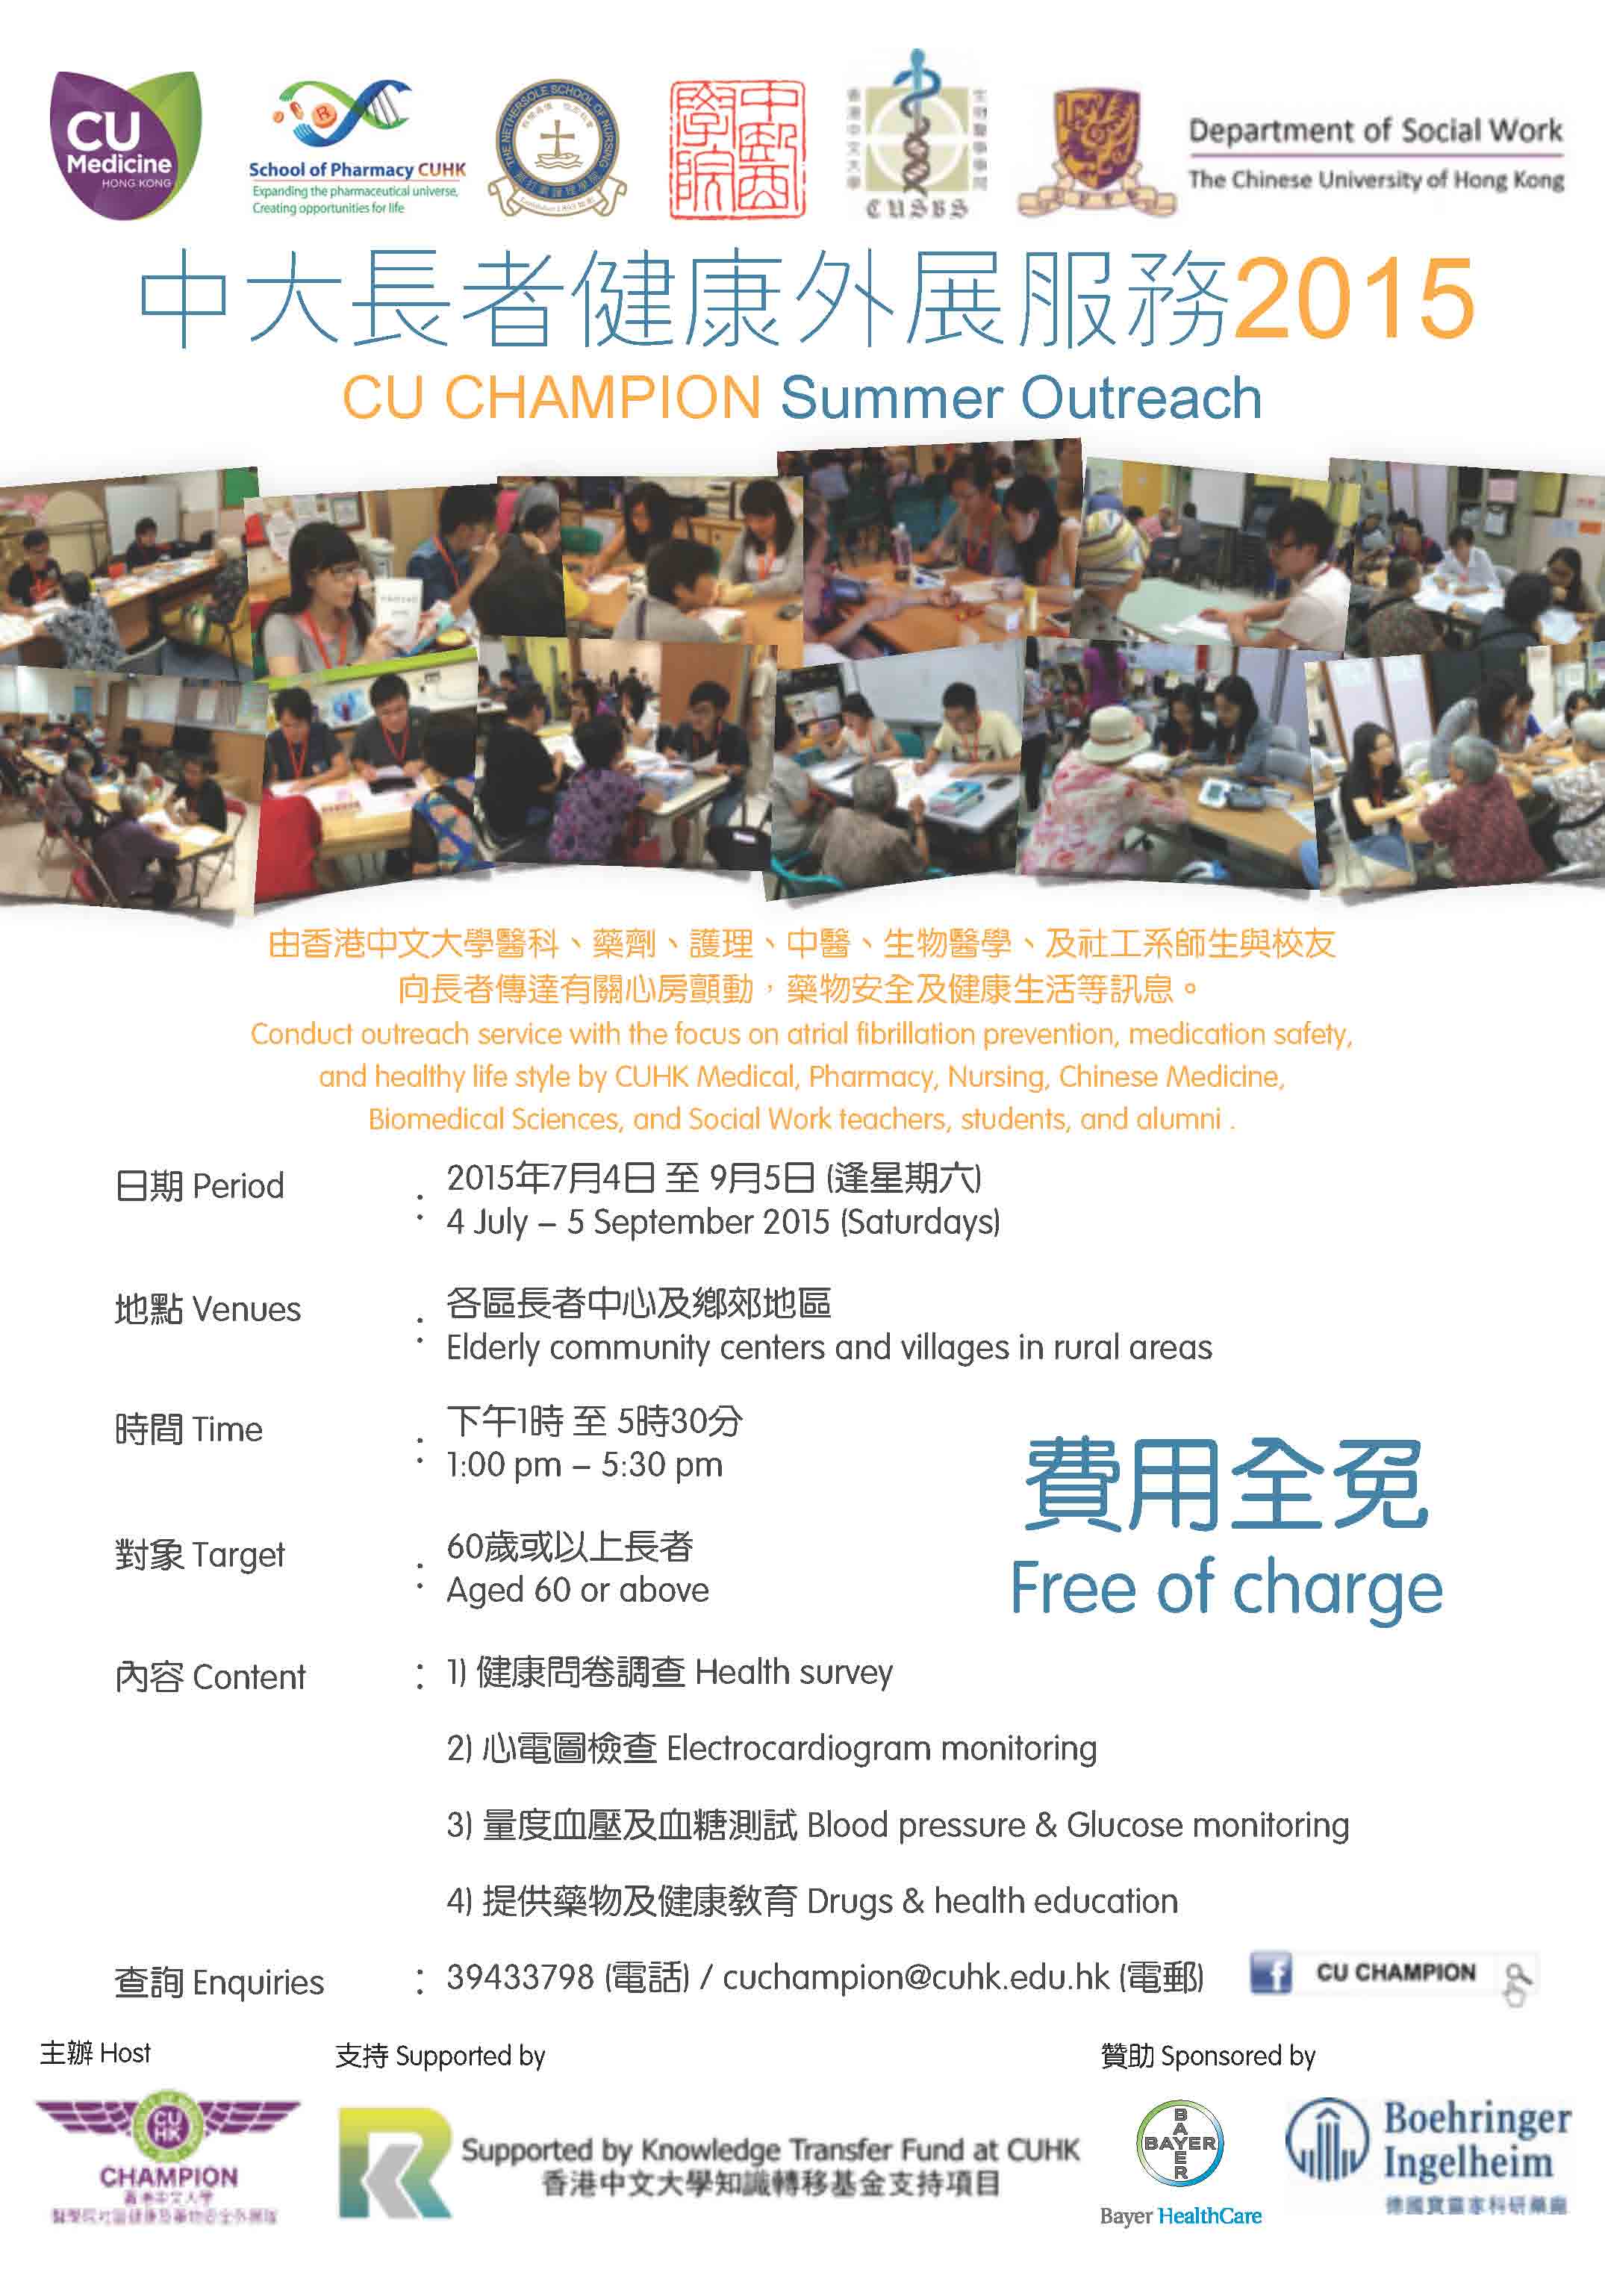 2015 CU CHAMPION Summer Outreach @ Elderly community centers and villages in rural areas